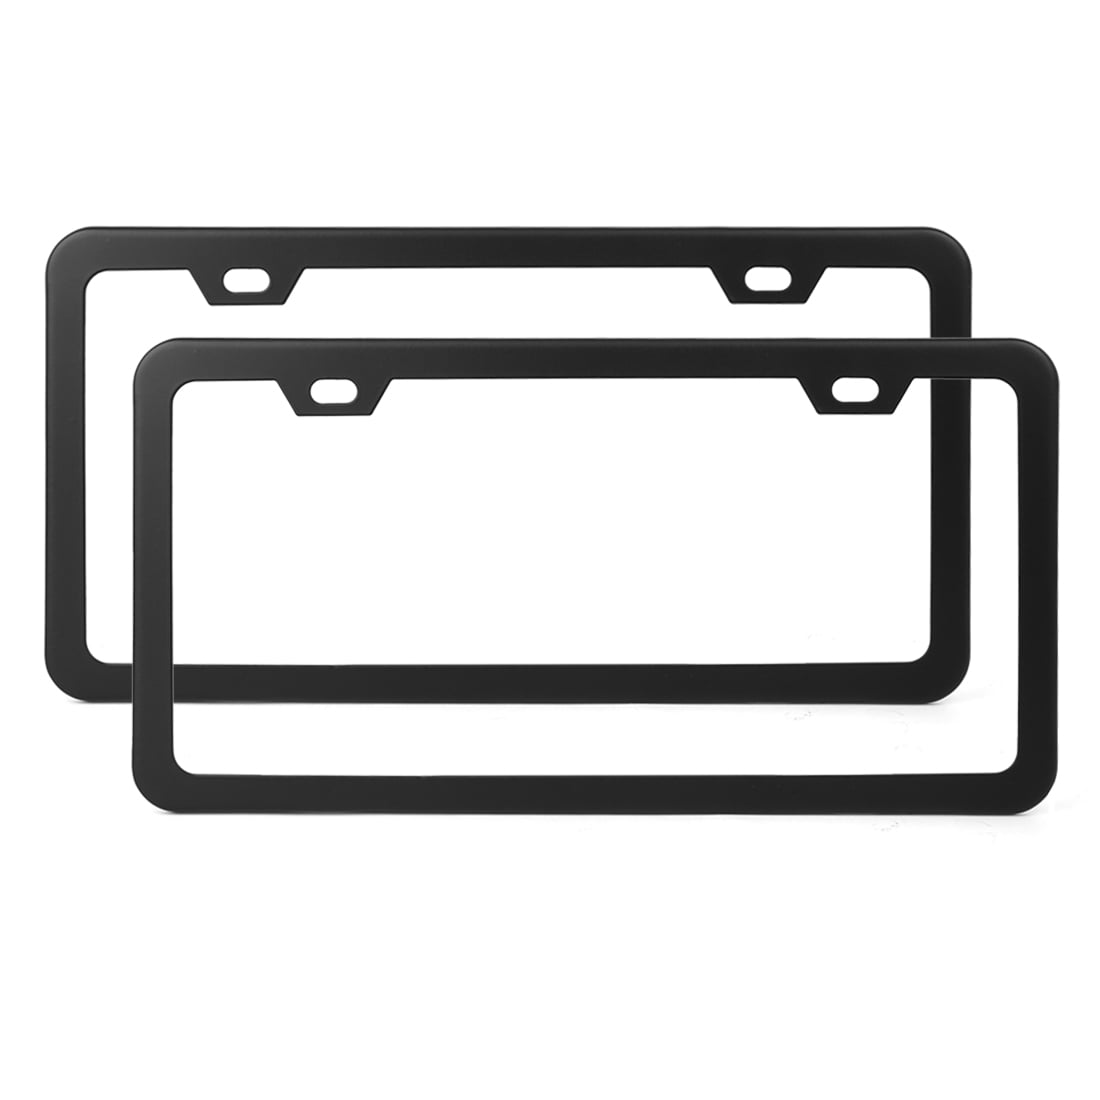 1PC Chrome Stainless Steel Metal License Plate Frame Tag Cover With Screw Ca DFI